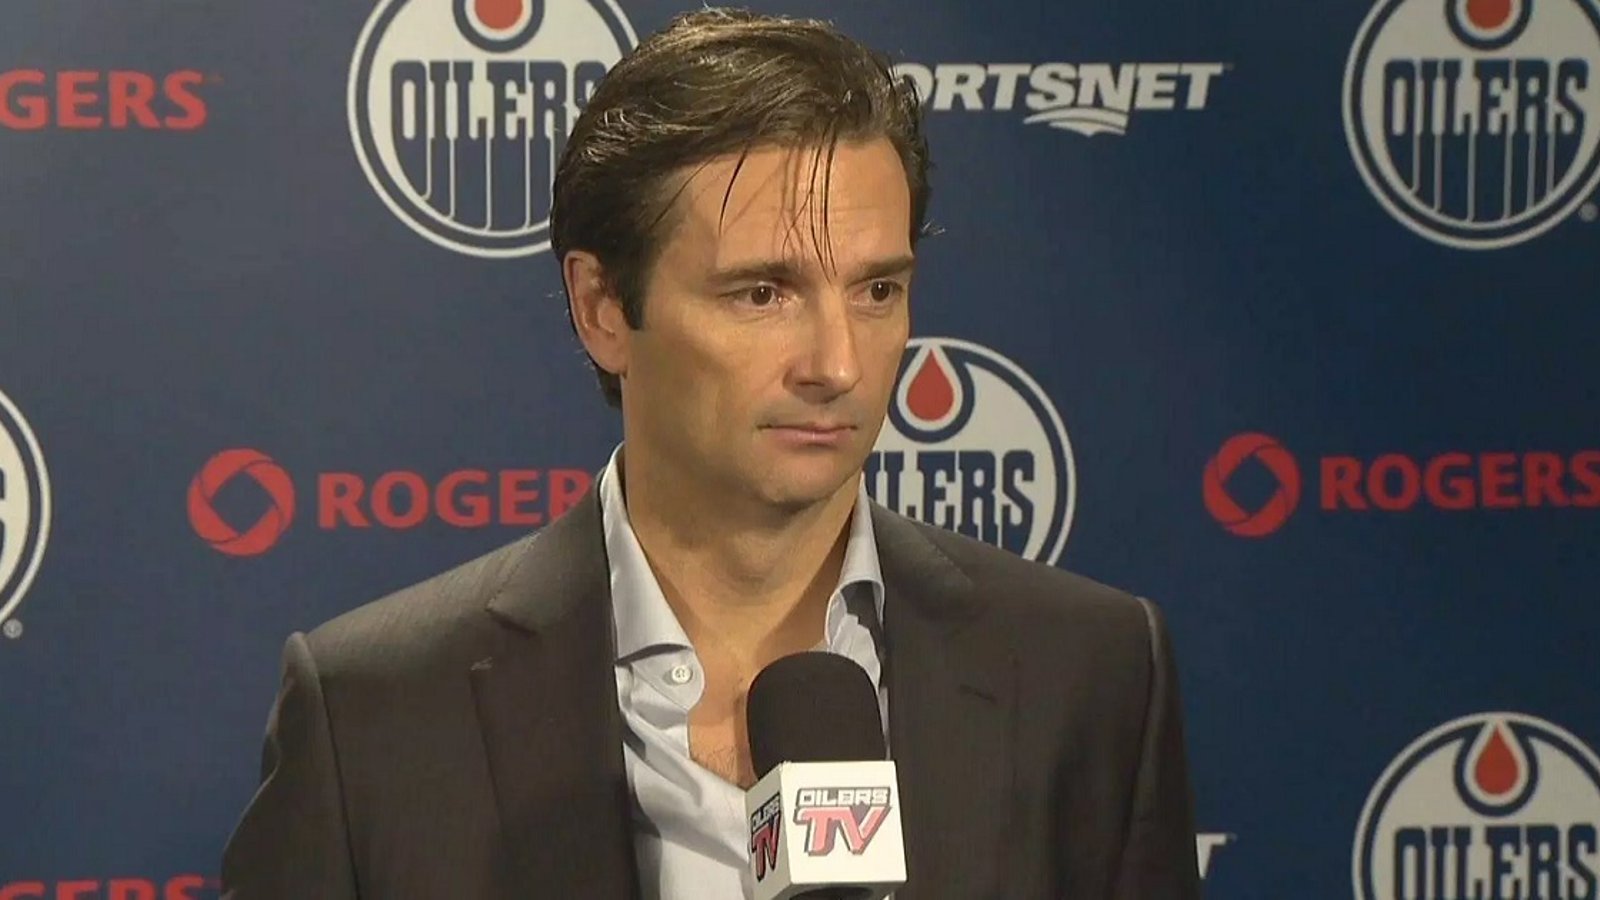 Rumor: Dallas Eakins pegged as replacement for soon to be fired NHL head coach.